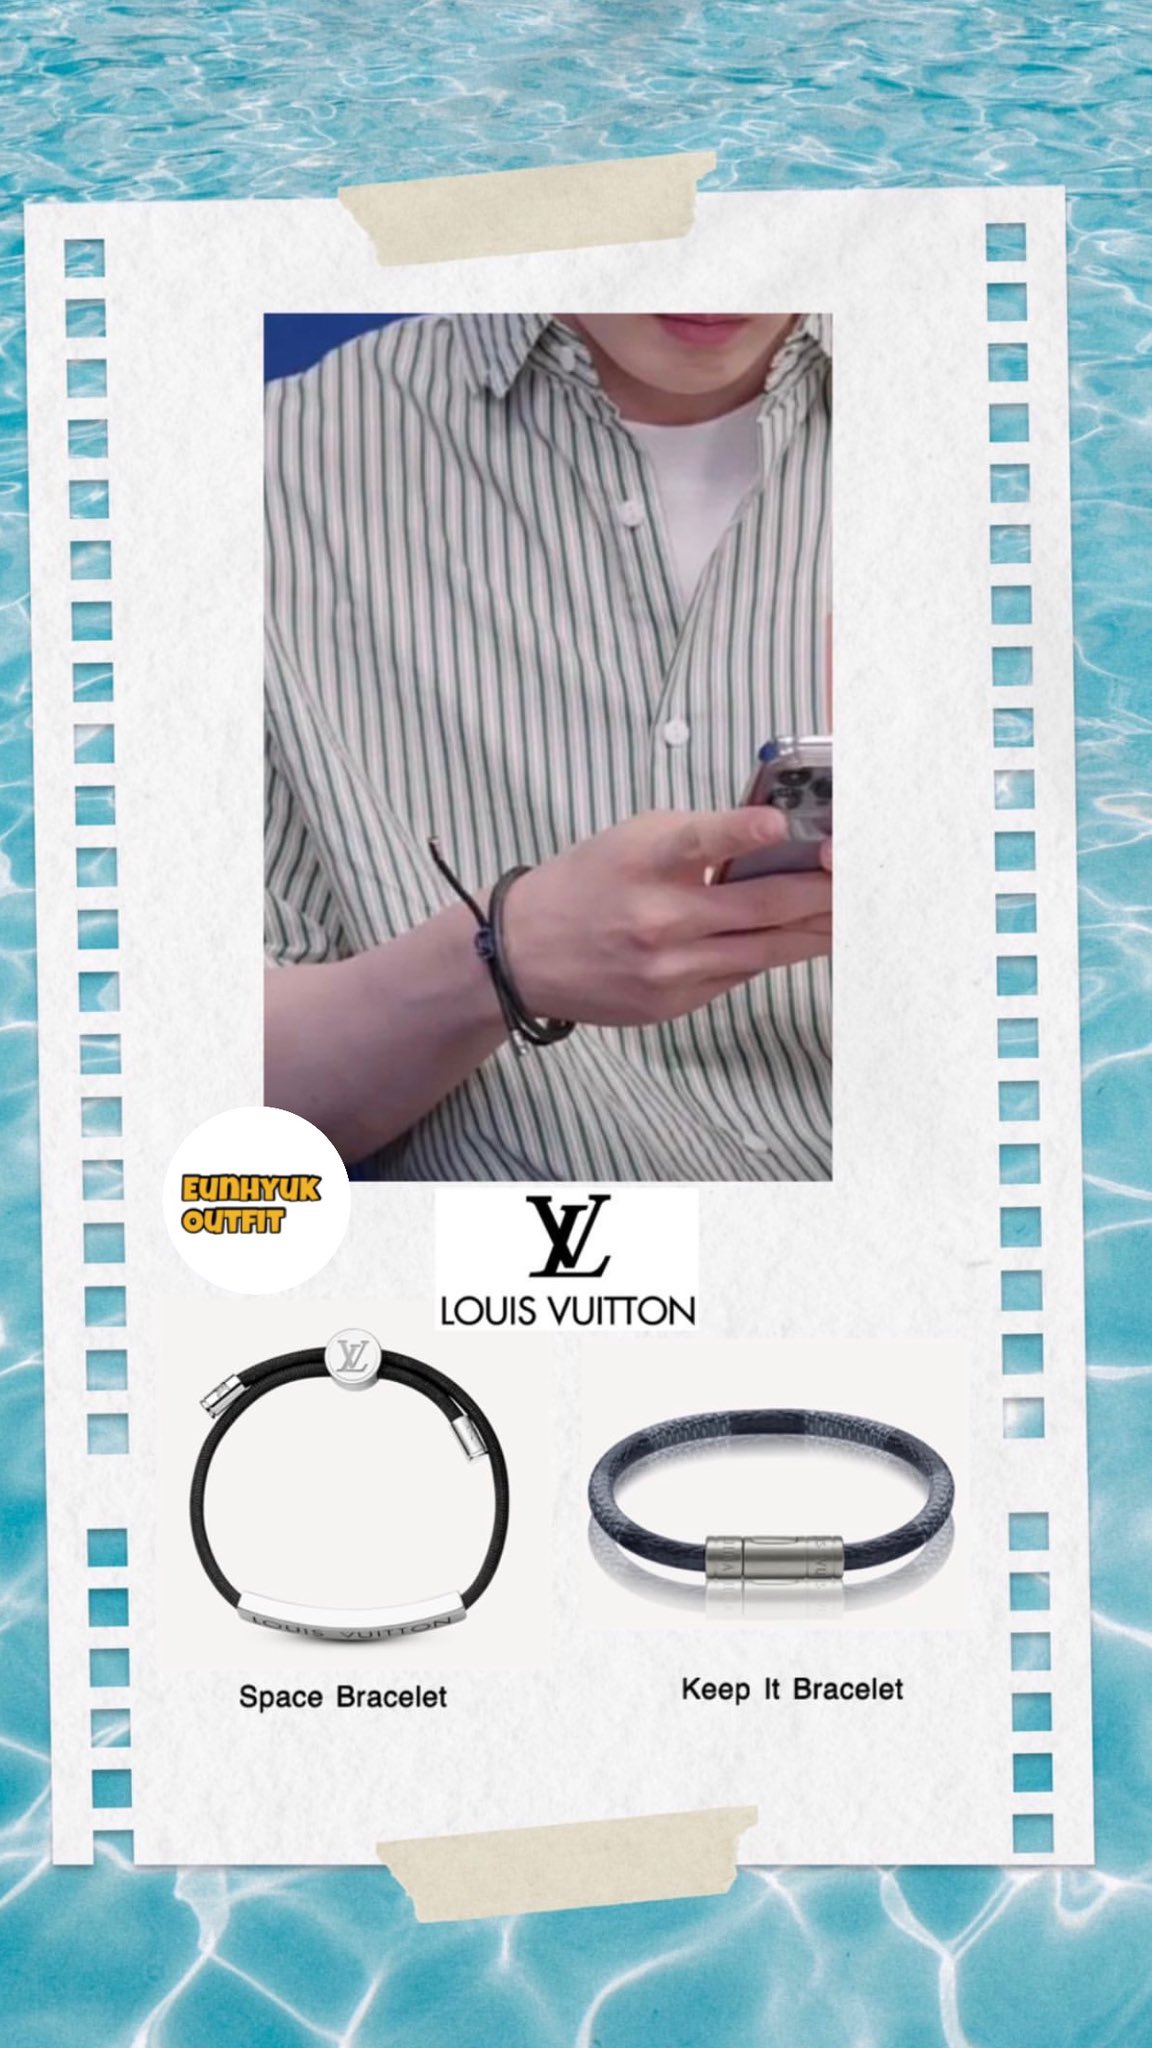 Donghaefashion on X: So… is this your couple bracelet ??? 🤔🤔 #donghae  #eunhyuk #동해 #은혁  / X